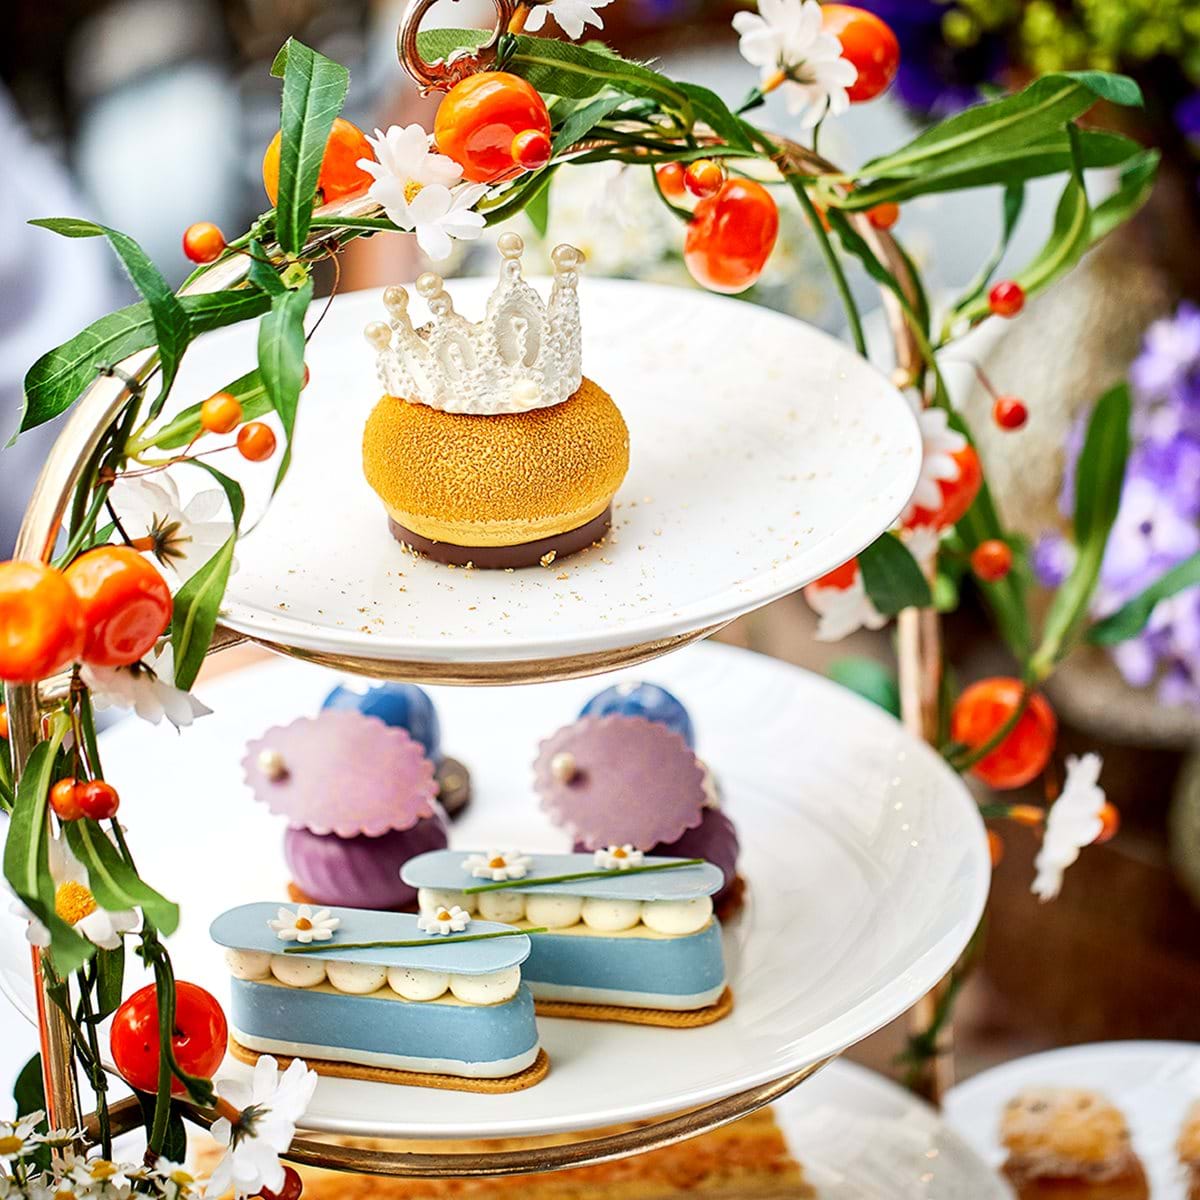 The Queen of Afternoon Teas at Hotel Café Royal - SilverSpoon London